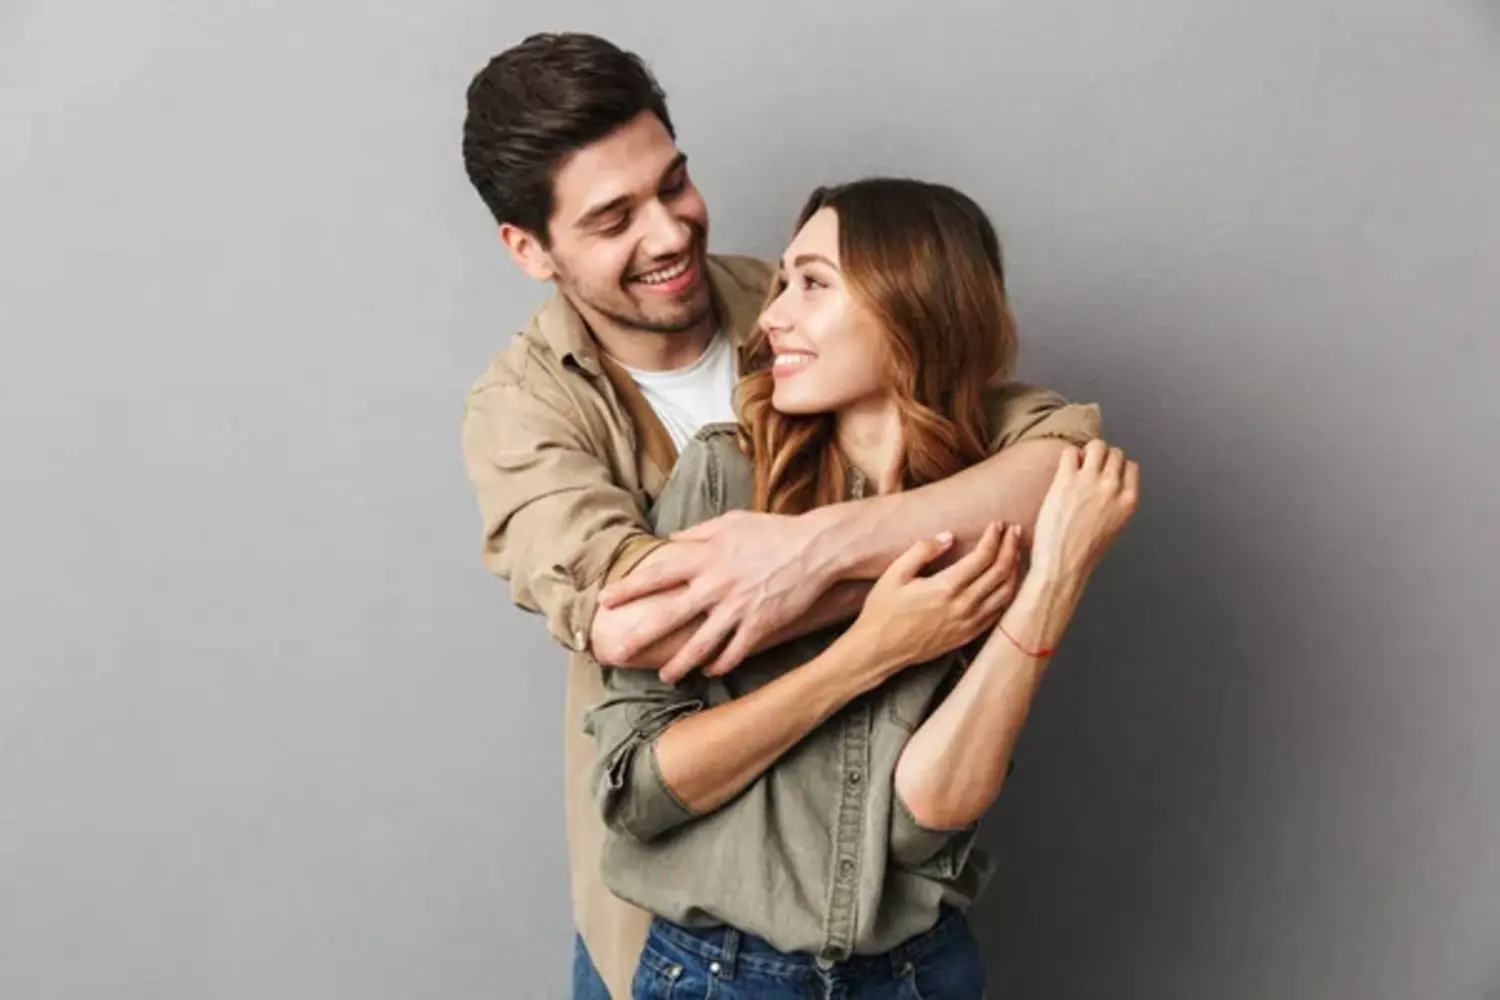 Signs He Is Attracted To You Through Body Language